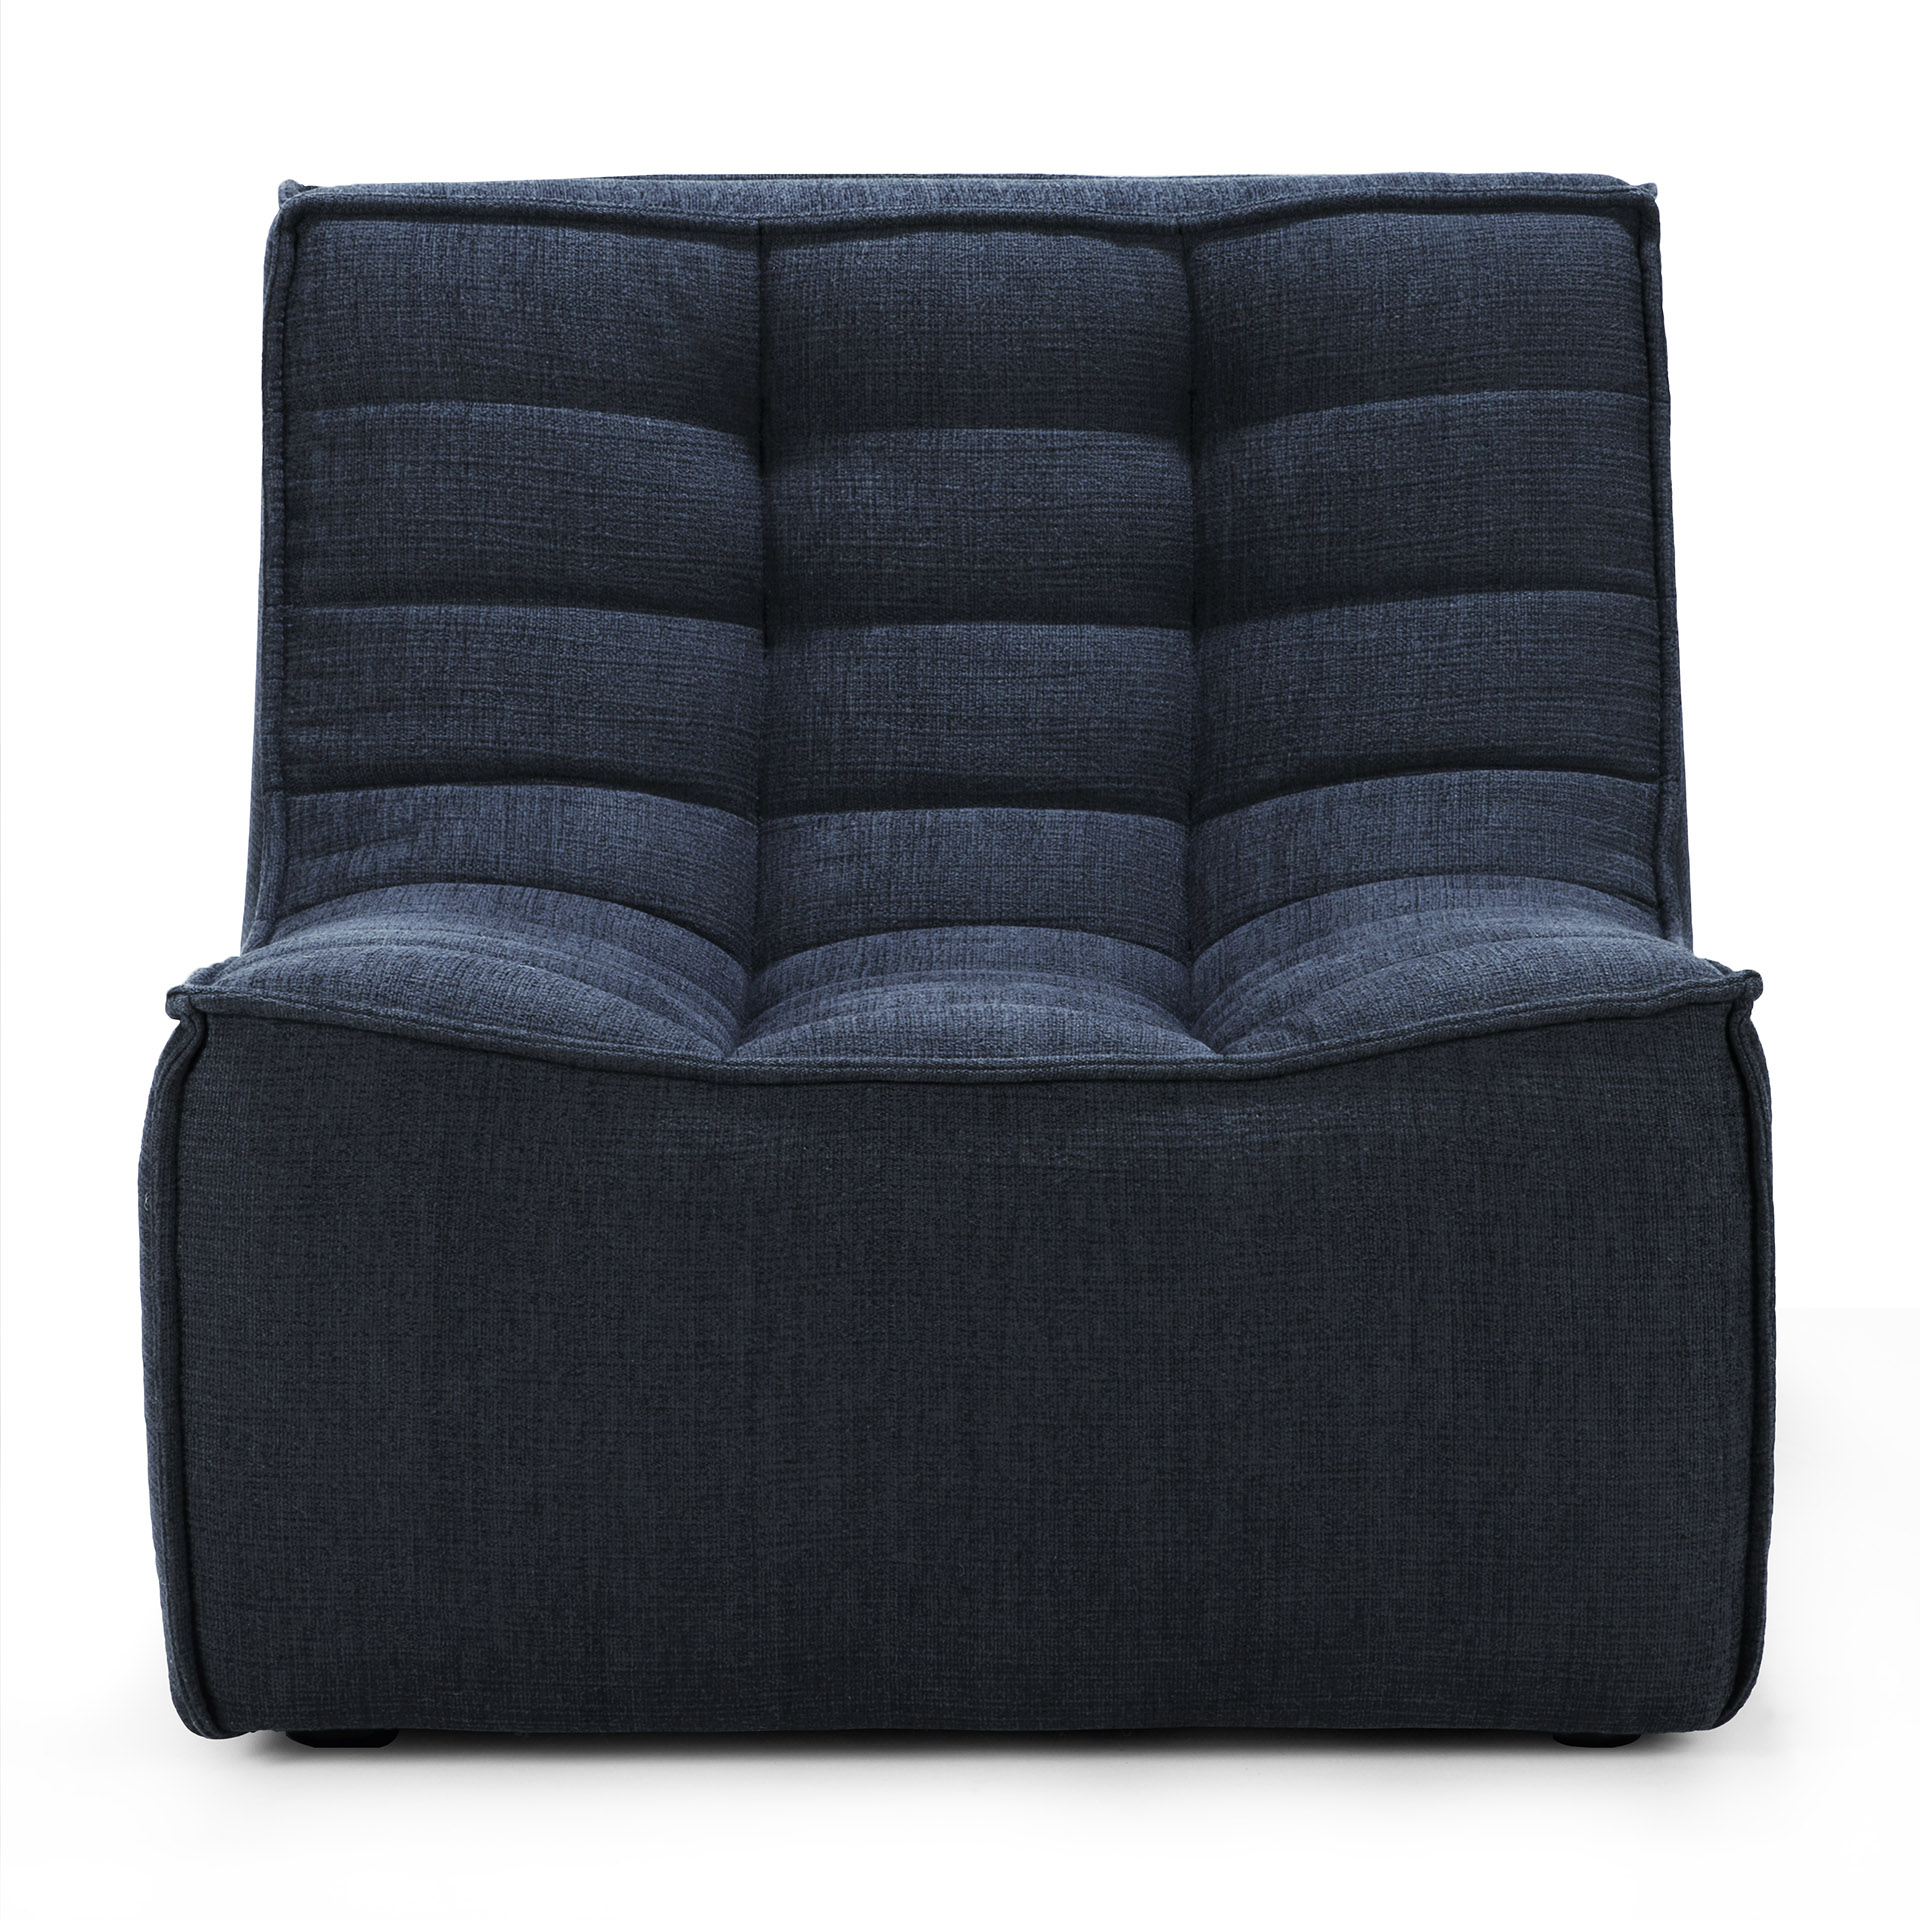 20222_N701_Sofa_1_seater_graphite_front_cut_web